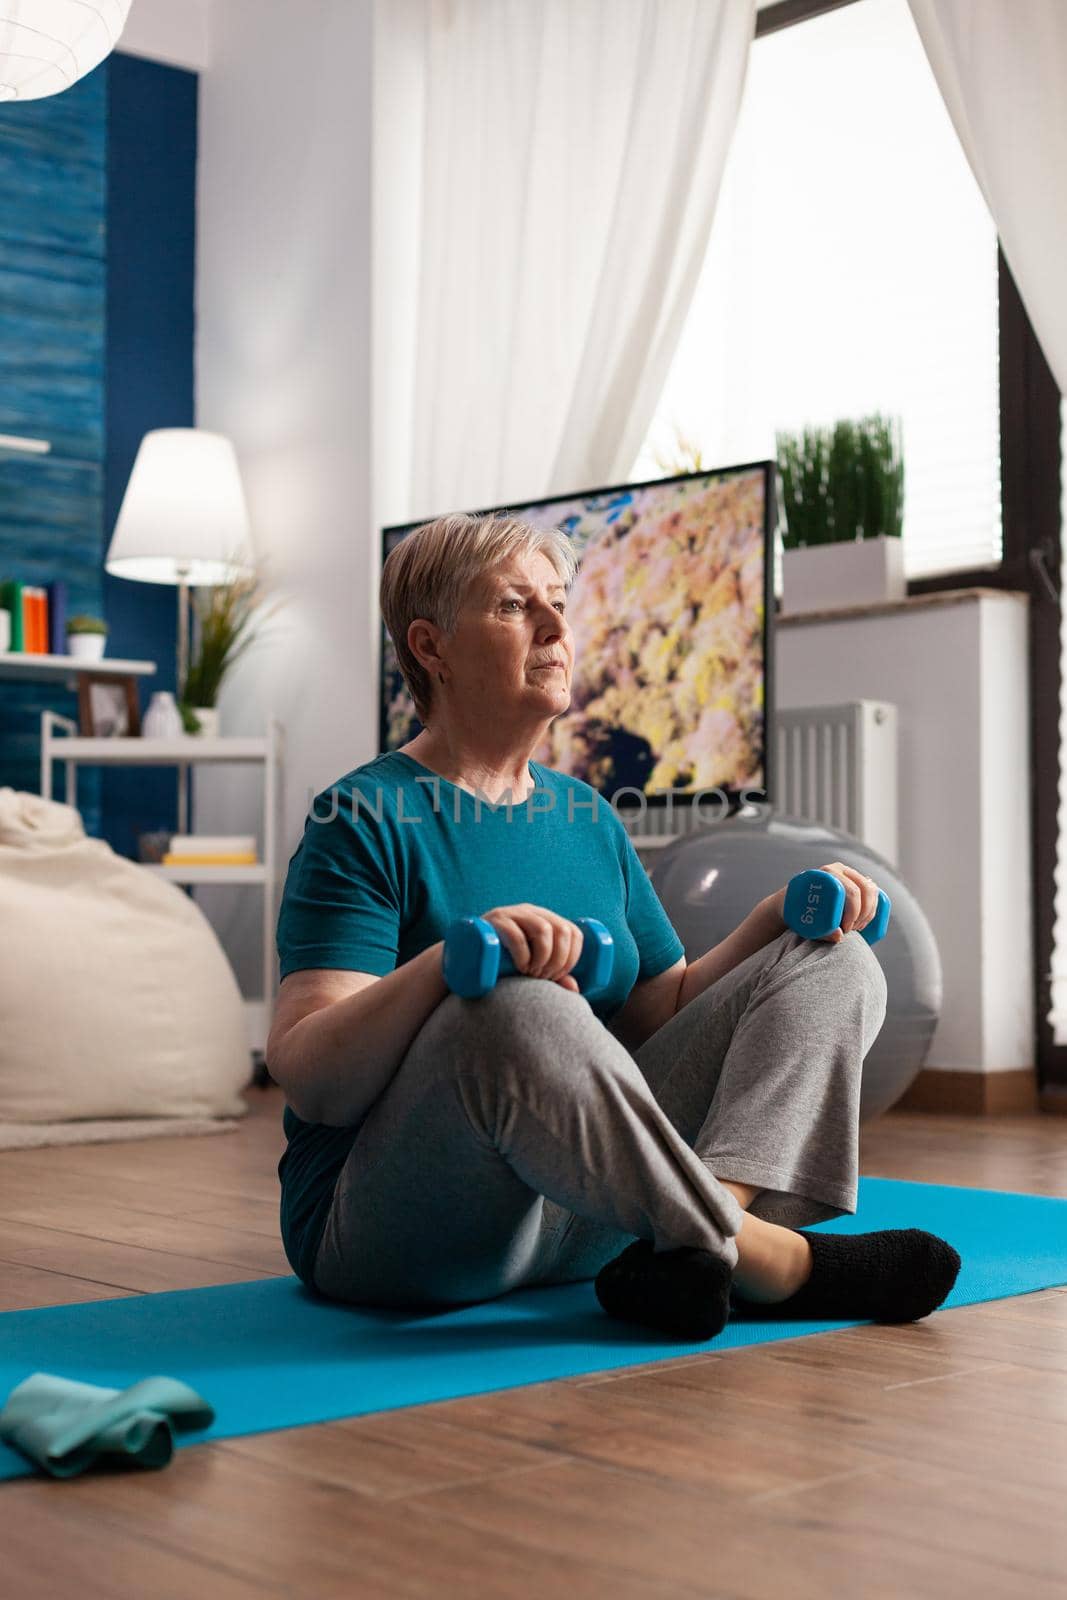 Retired senior woman sitting on yoga mat holding fitness dumbbells in lotus position during pilates wellness routine. Healthy pensioner training abdominals muscles practicing pilates in living room